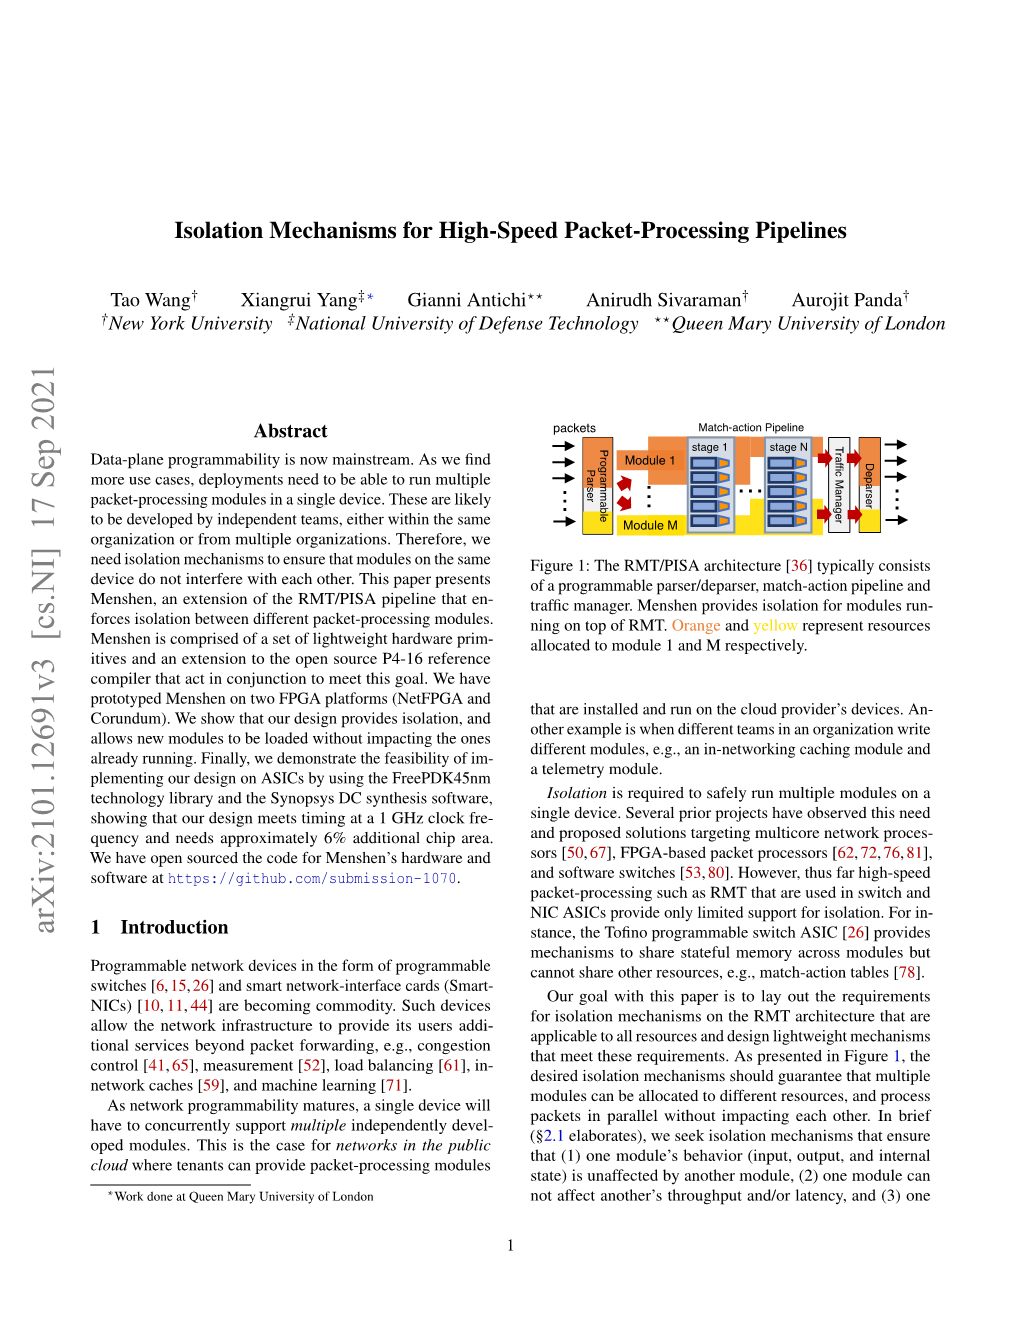 Isolation Mechanisms for High-Speed Packet-Processing Pipelines